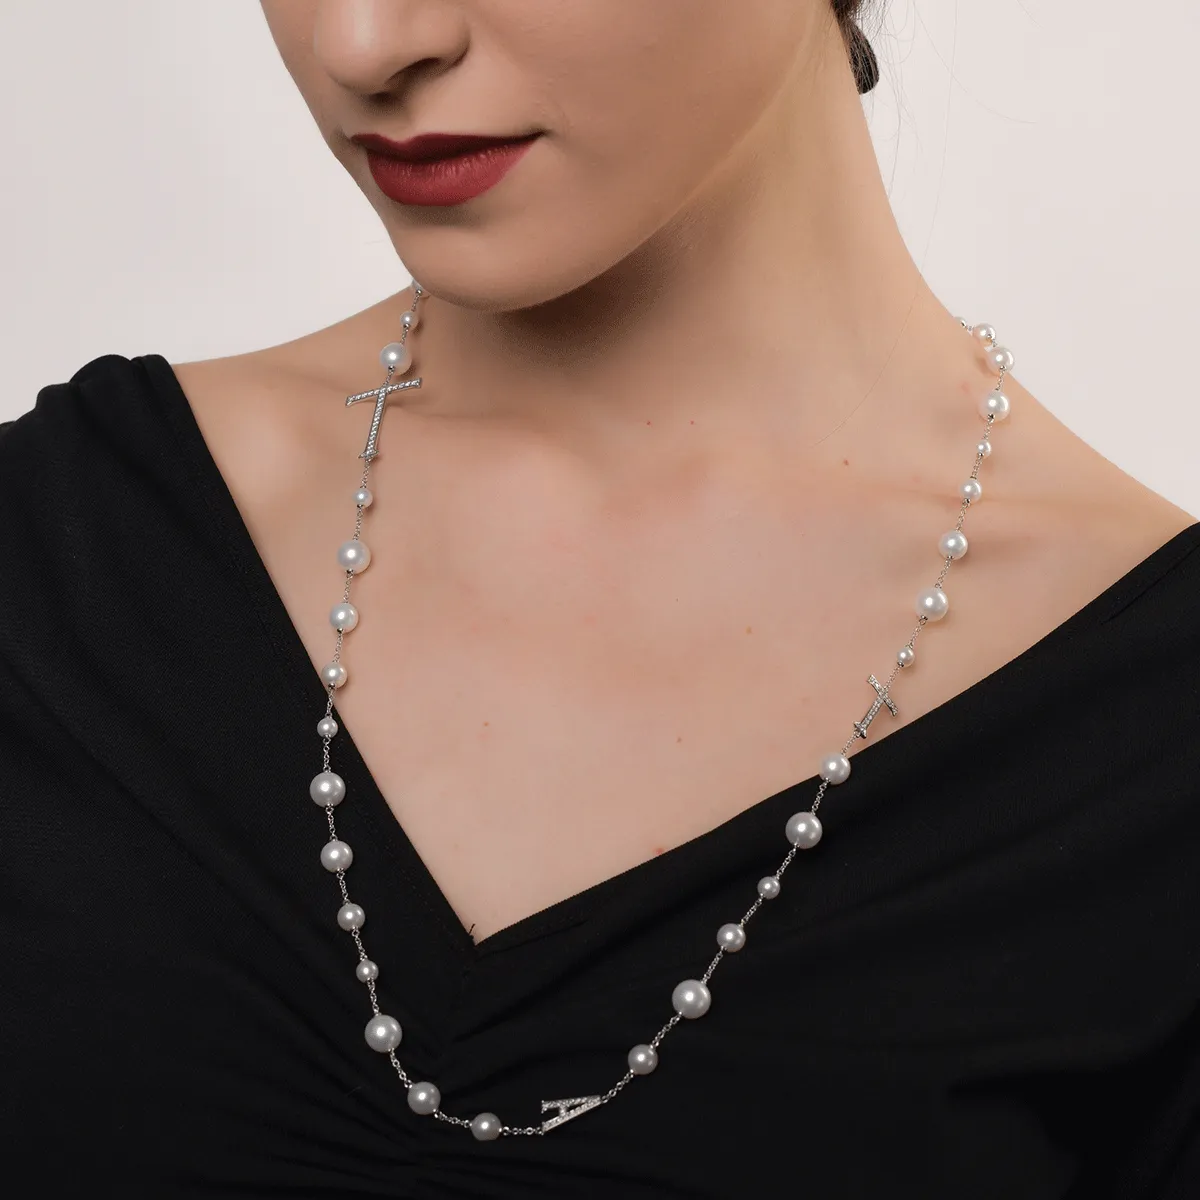 18K white gold chain with 106.48ct cultured pearls and 0.68ct diamonds